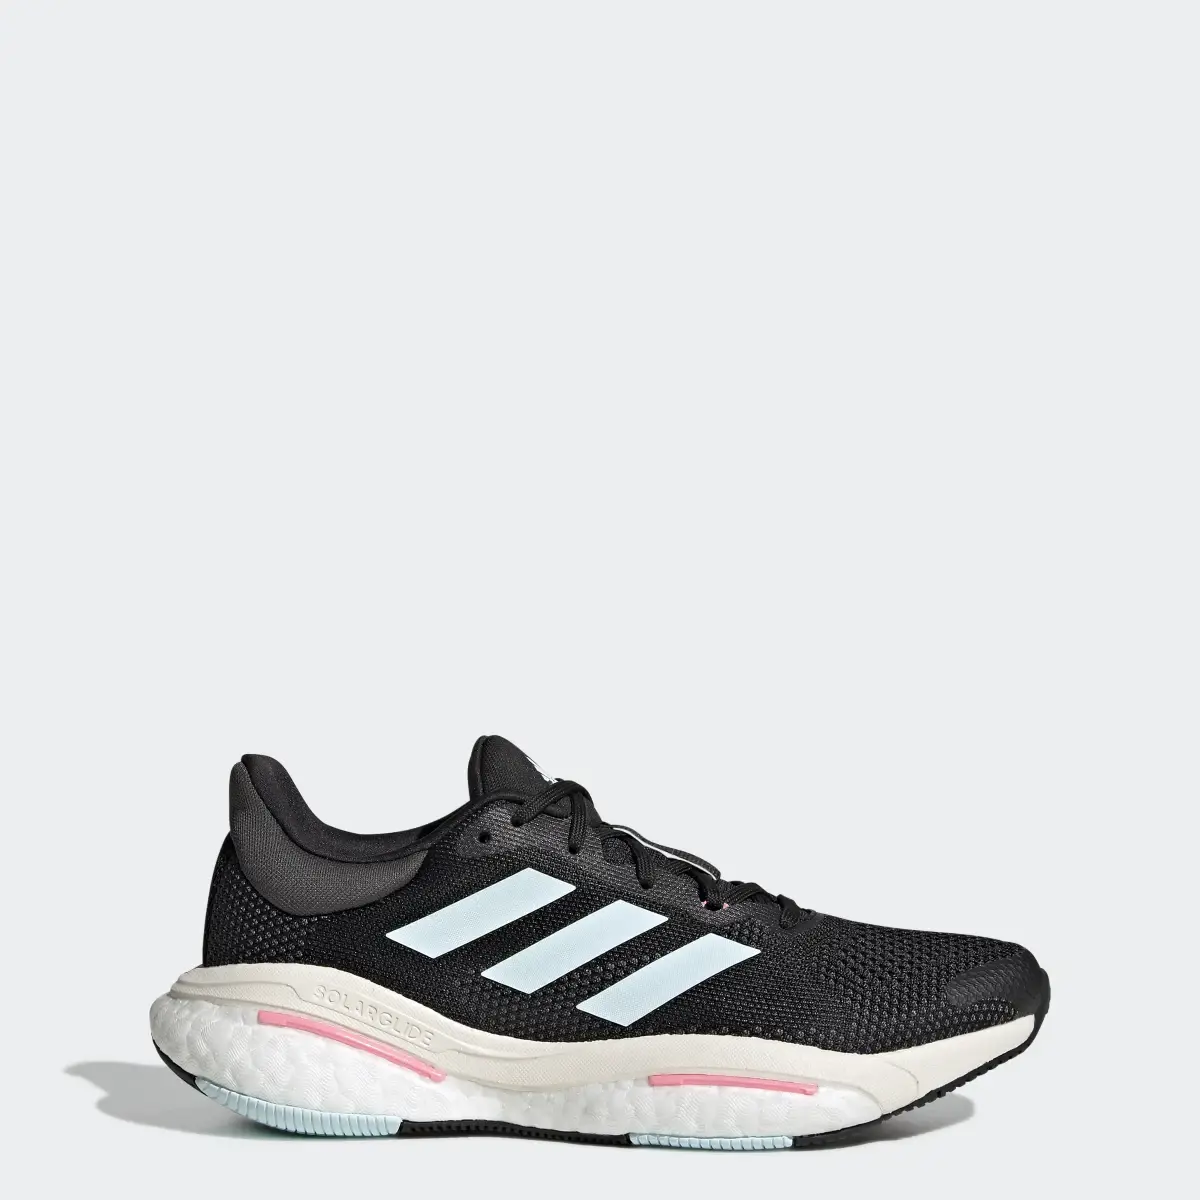 Adidas Solarglide 5 Running Shoes. 1